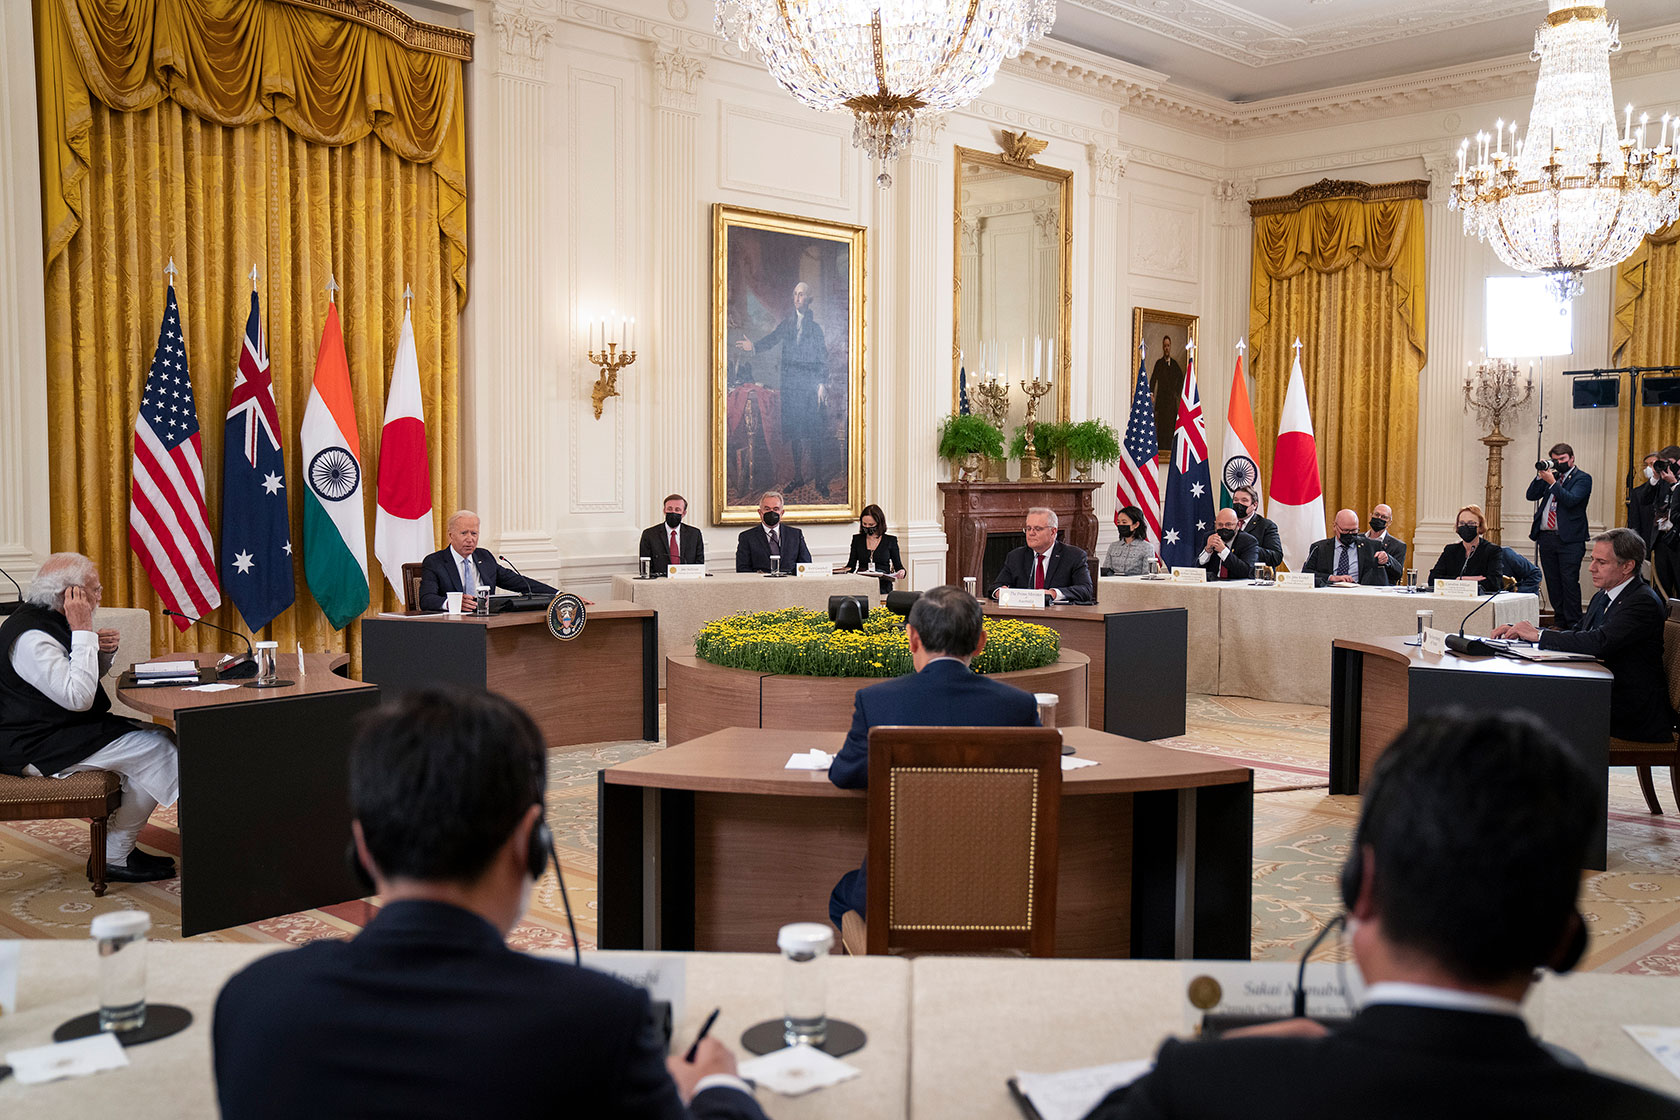 Photo shows Joe Biden, Narendra Modi, Scott Morrison, and Yoshihide Suga sitting at tables and facing each other, with other staff sitting around the perimeter, in a room at the White House.